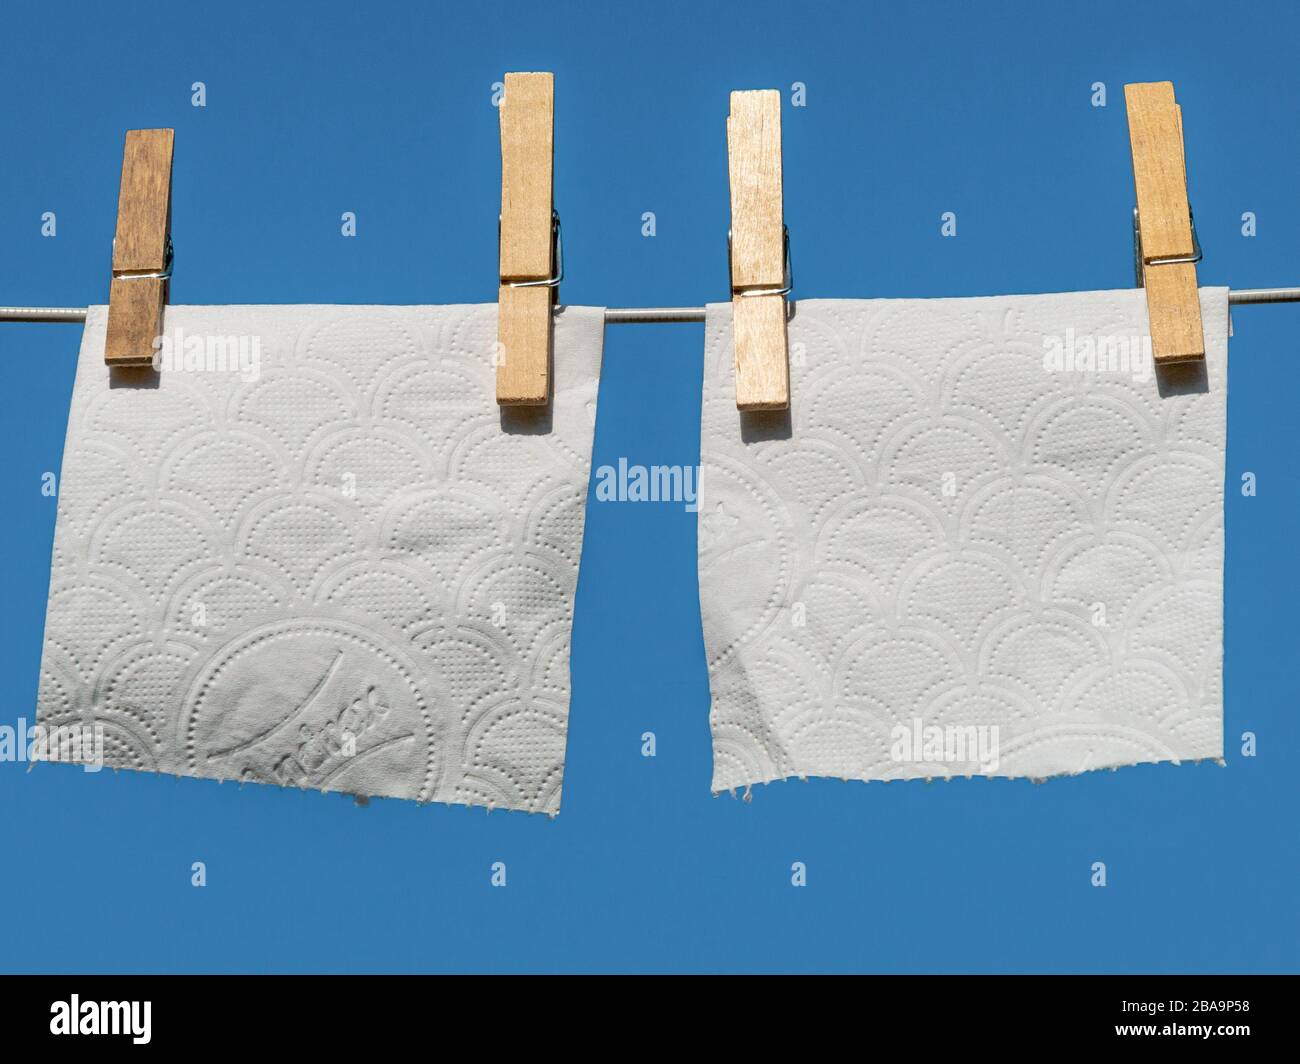 Desperate times - desperate measures. Concept image illustrating drying toilet / loo paper sheets for re-use during Covid-19 Coronavirus pandemic Stock Photo